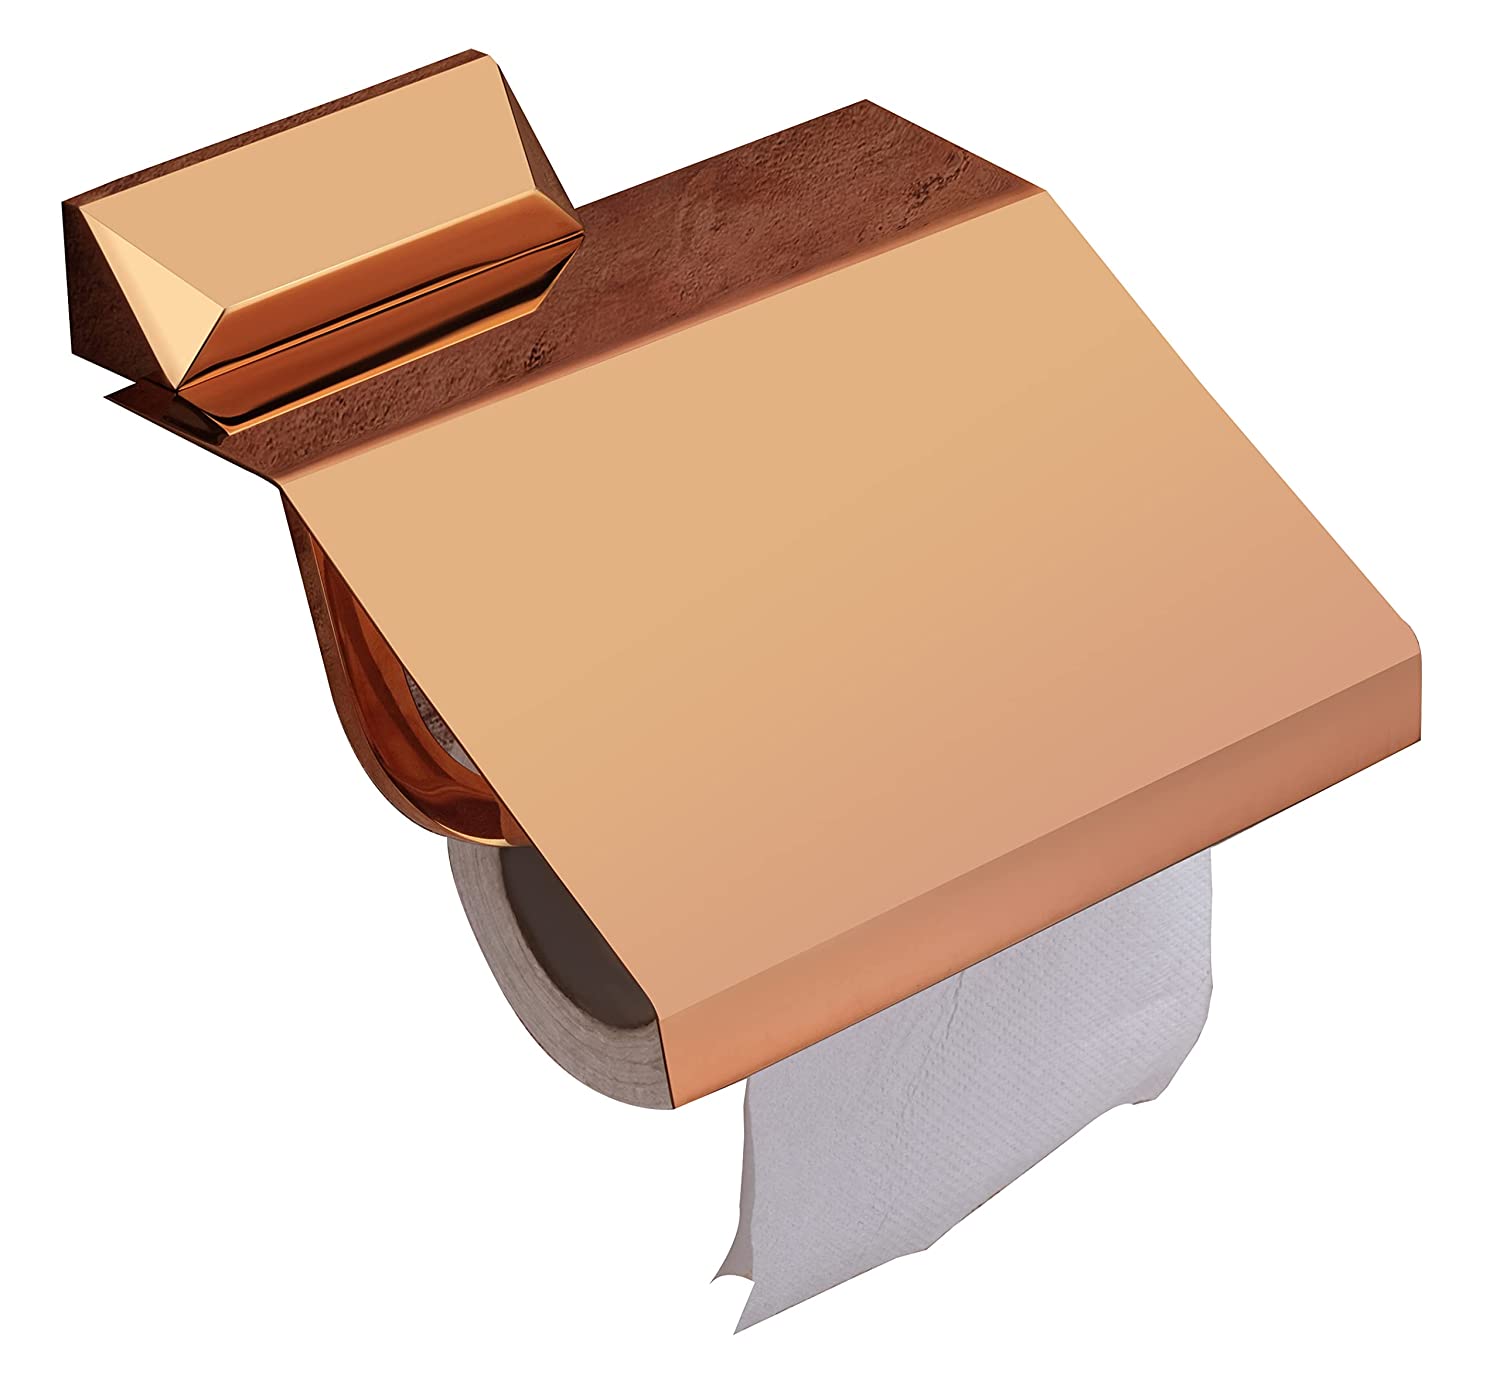 Aquieen Toilet Paper Holder with Flap Cover (Rose Gold)